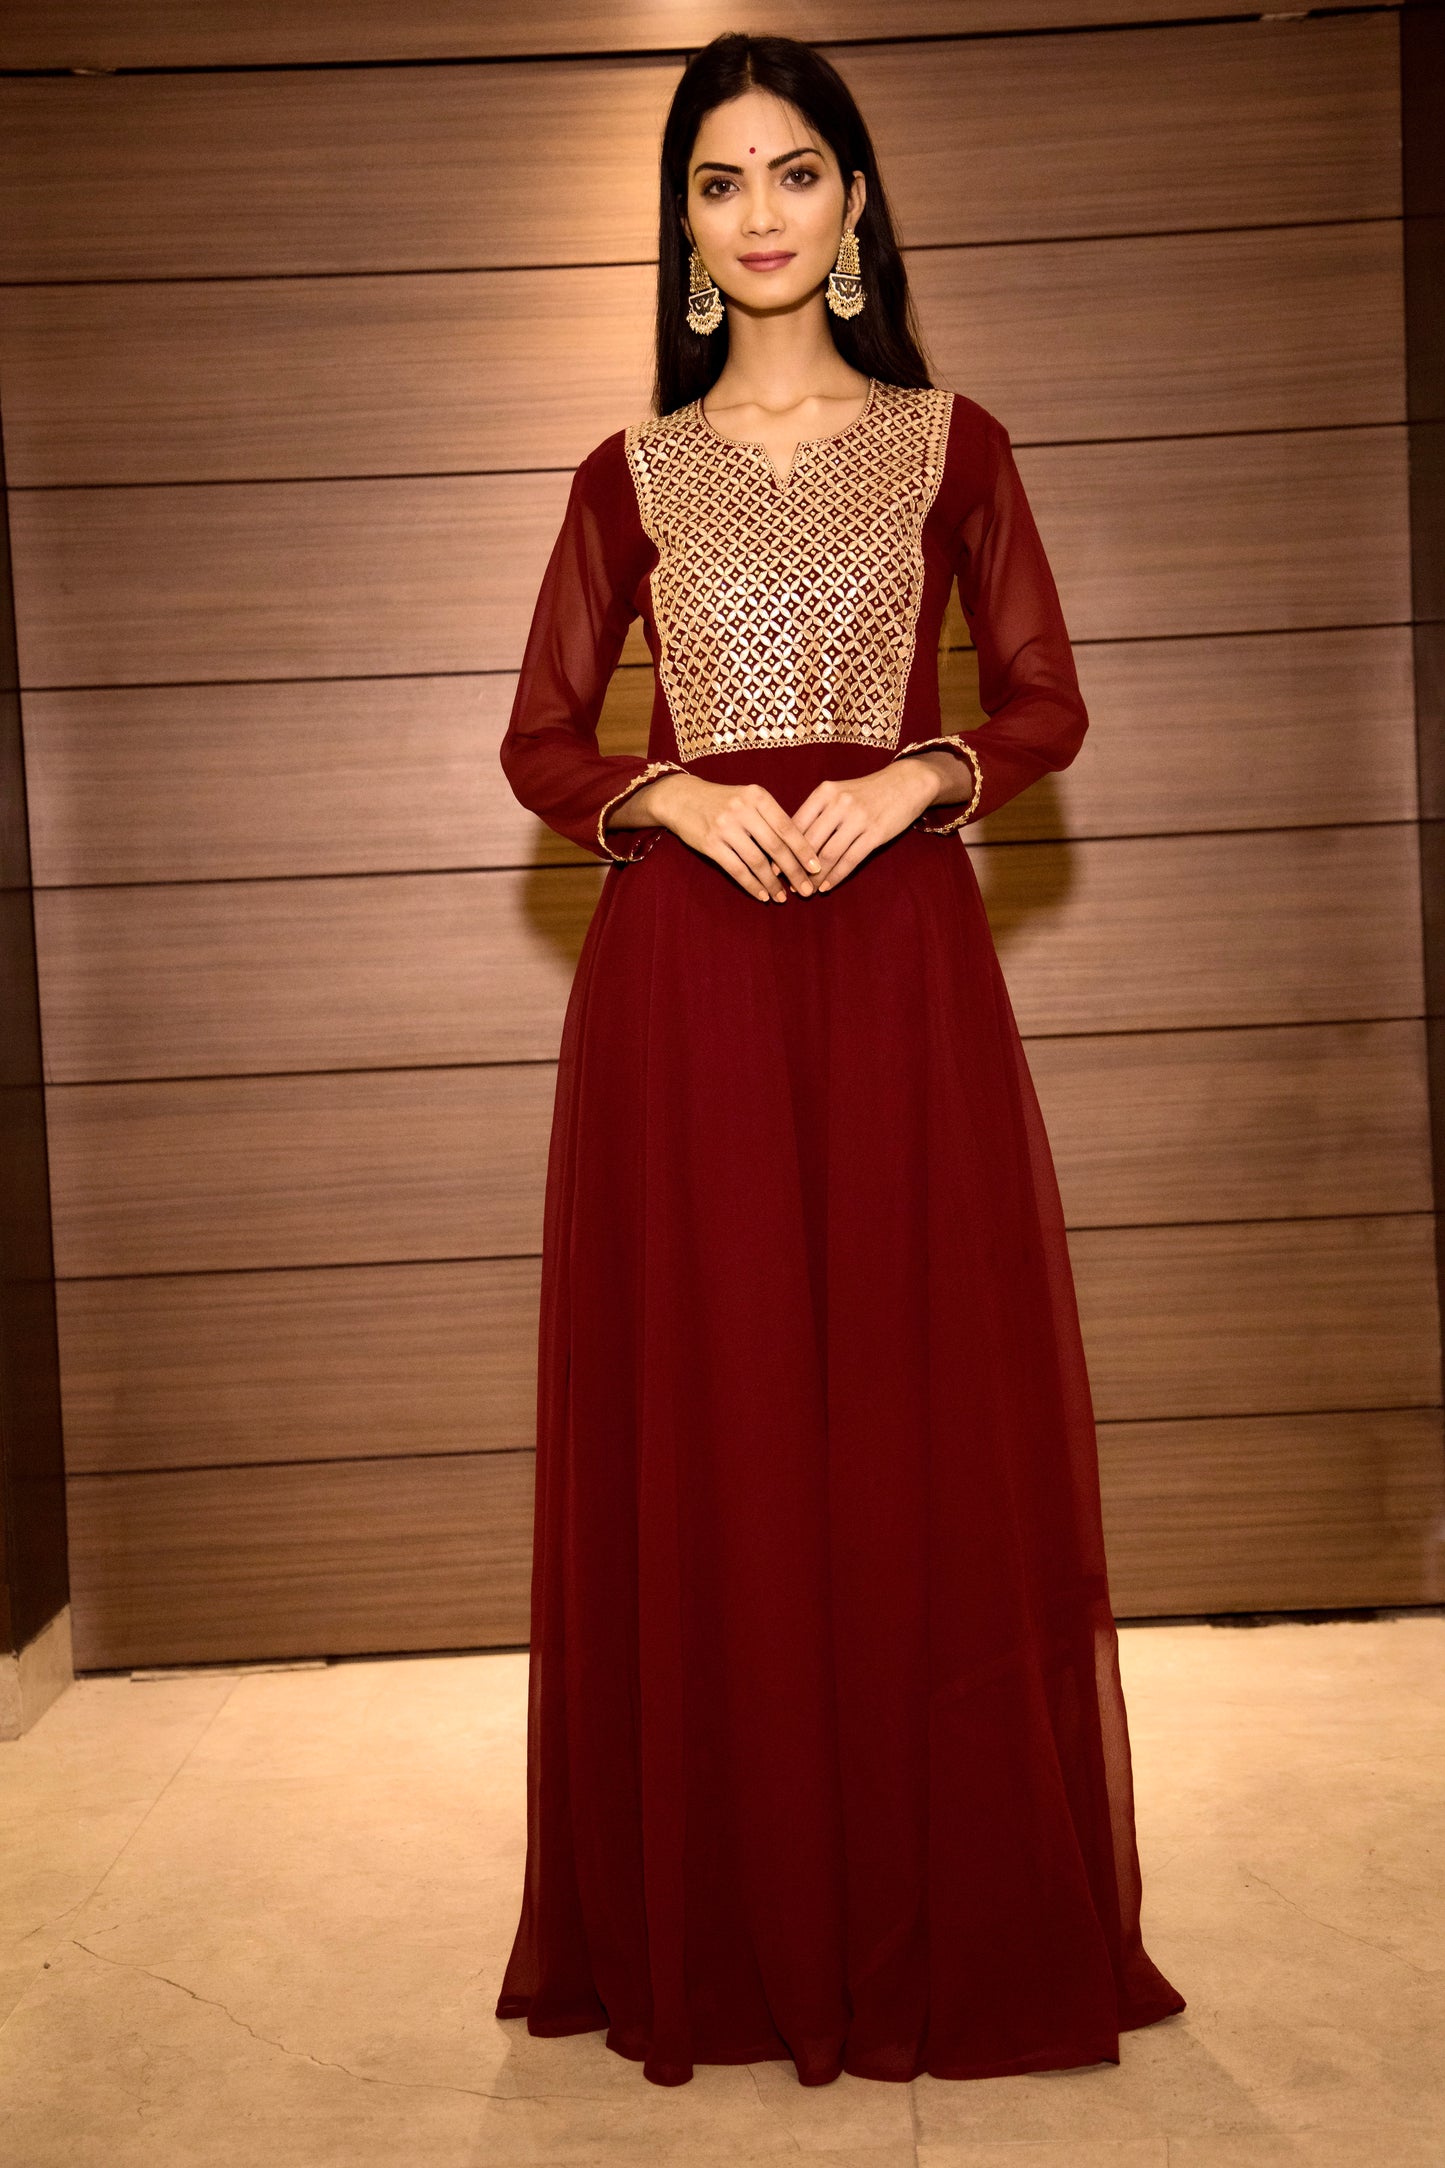 Party wear gown with gota patti hand embellishment.